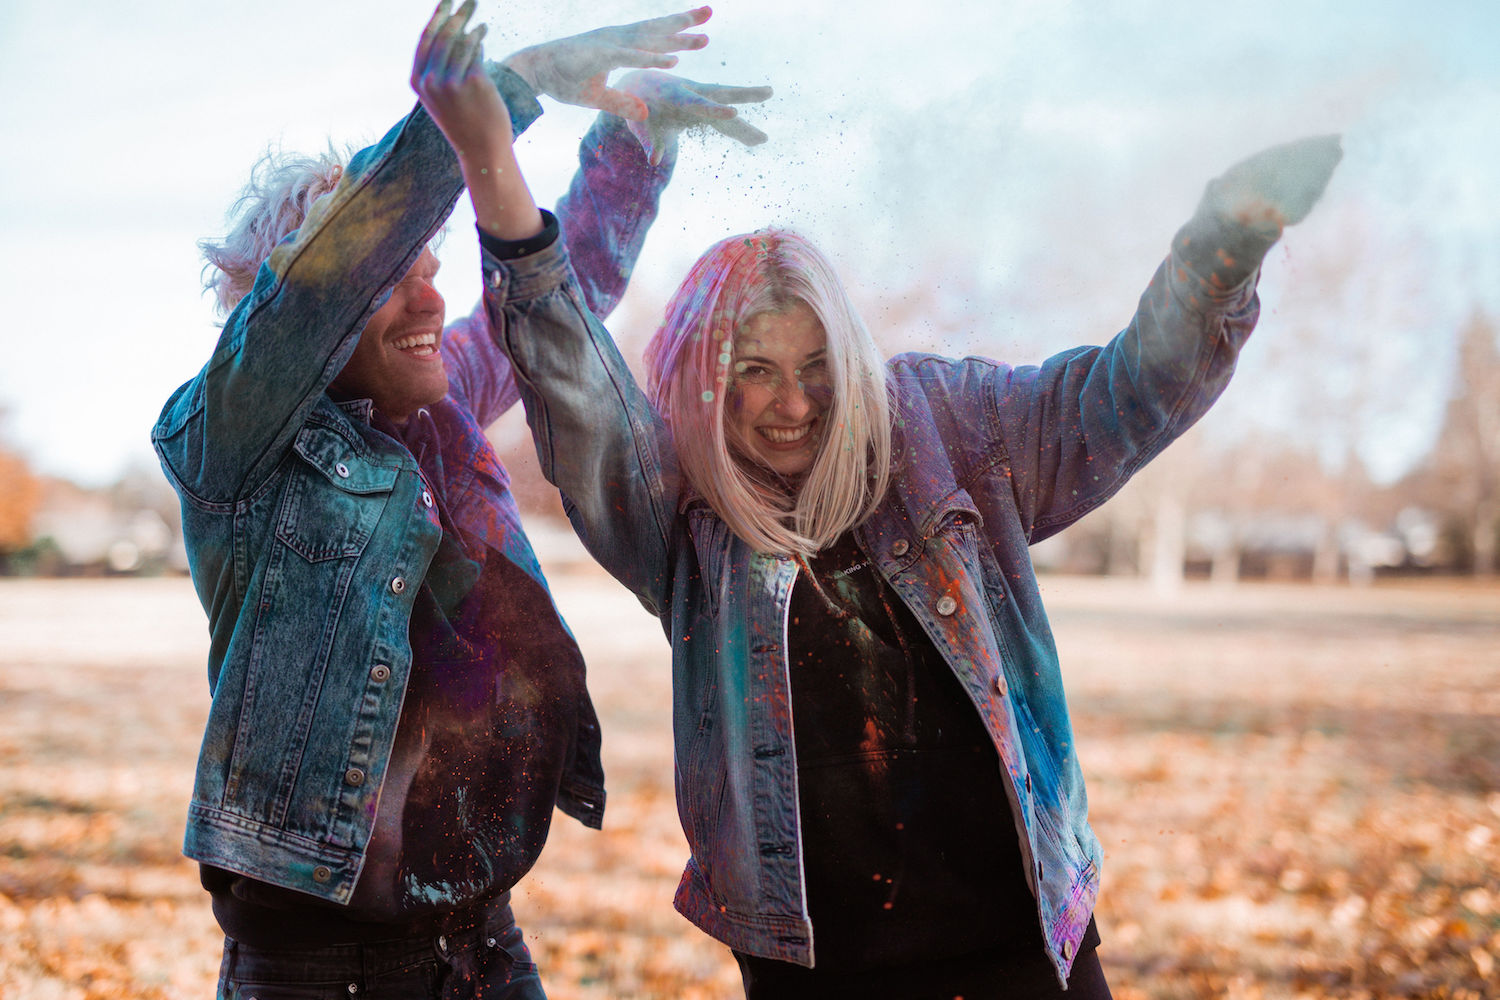 Two friends smile while throwing colored powder in the air